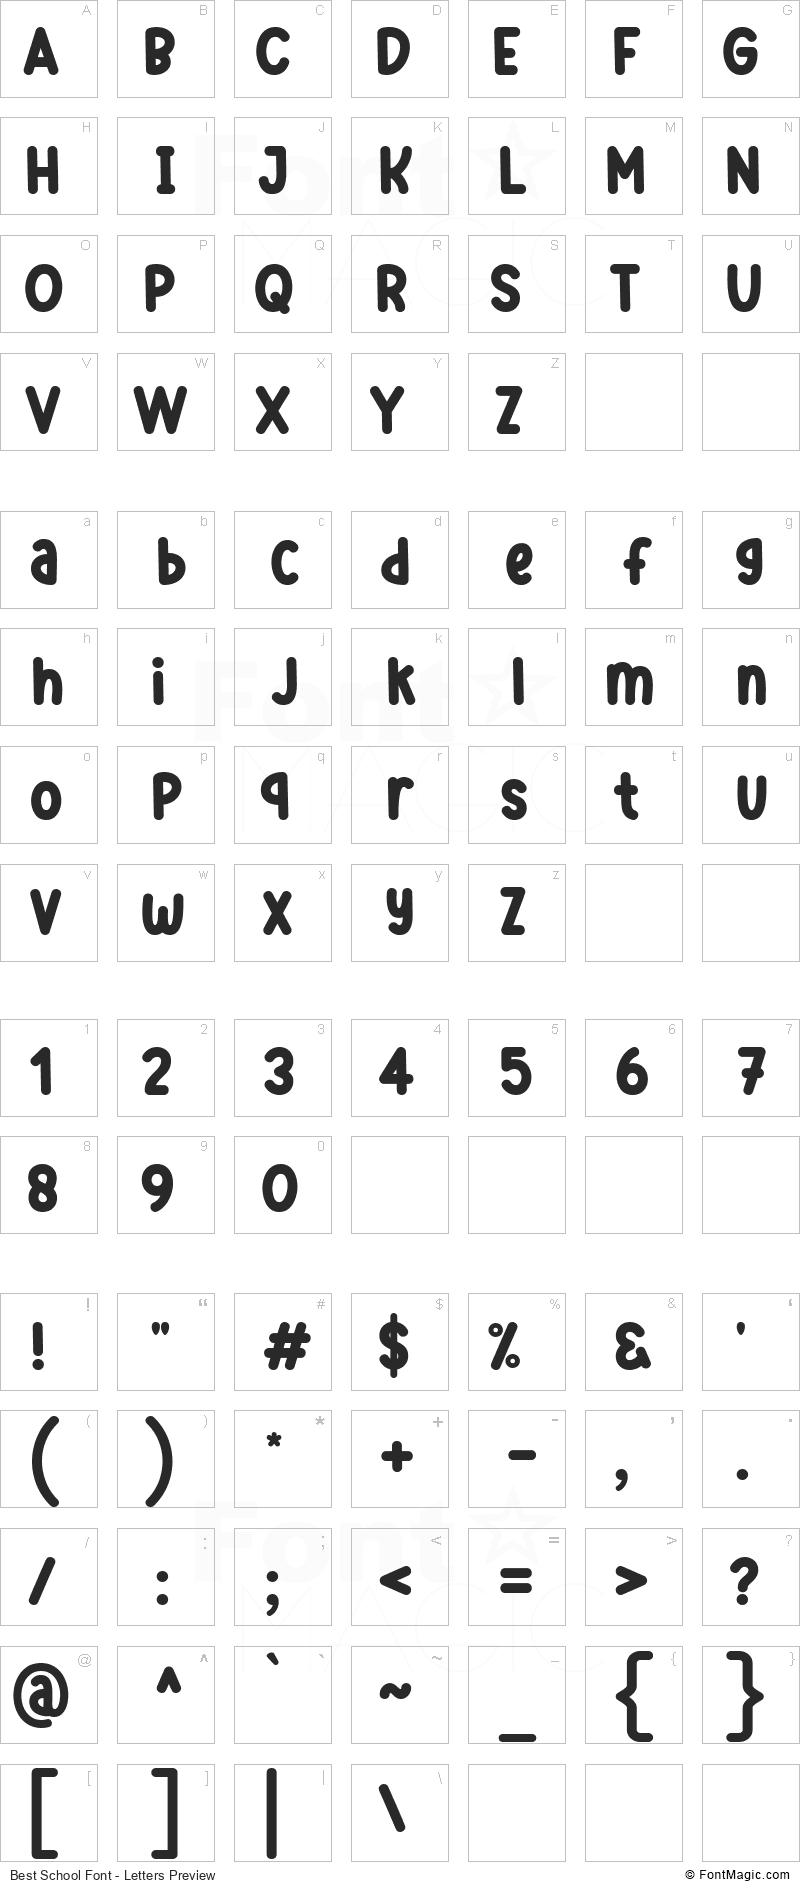 Best School Font - All Latters Preview Chart